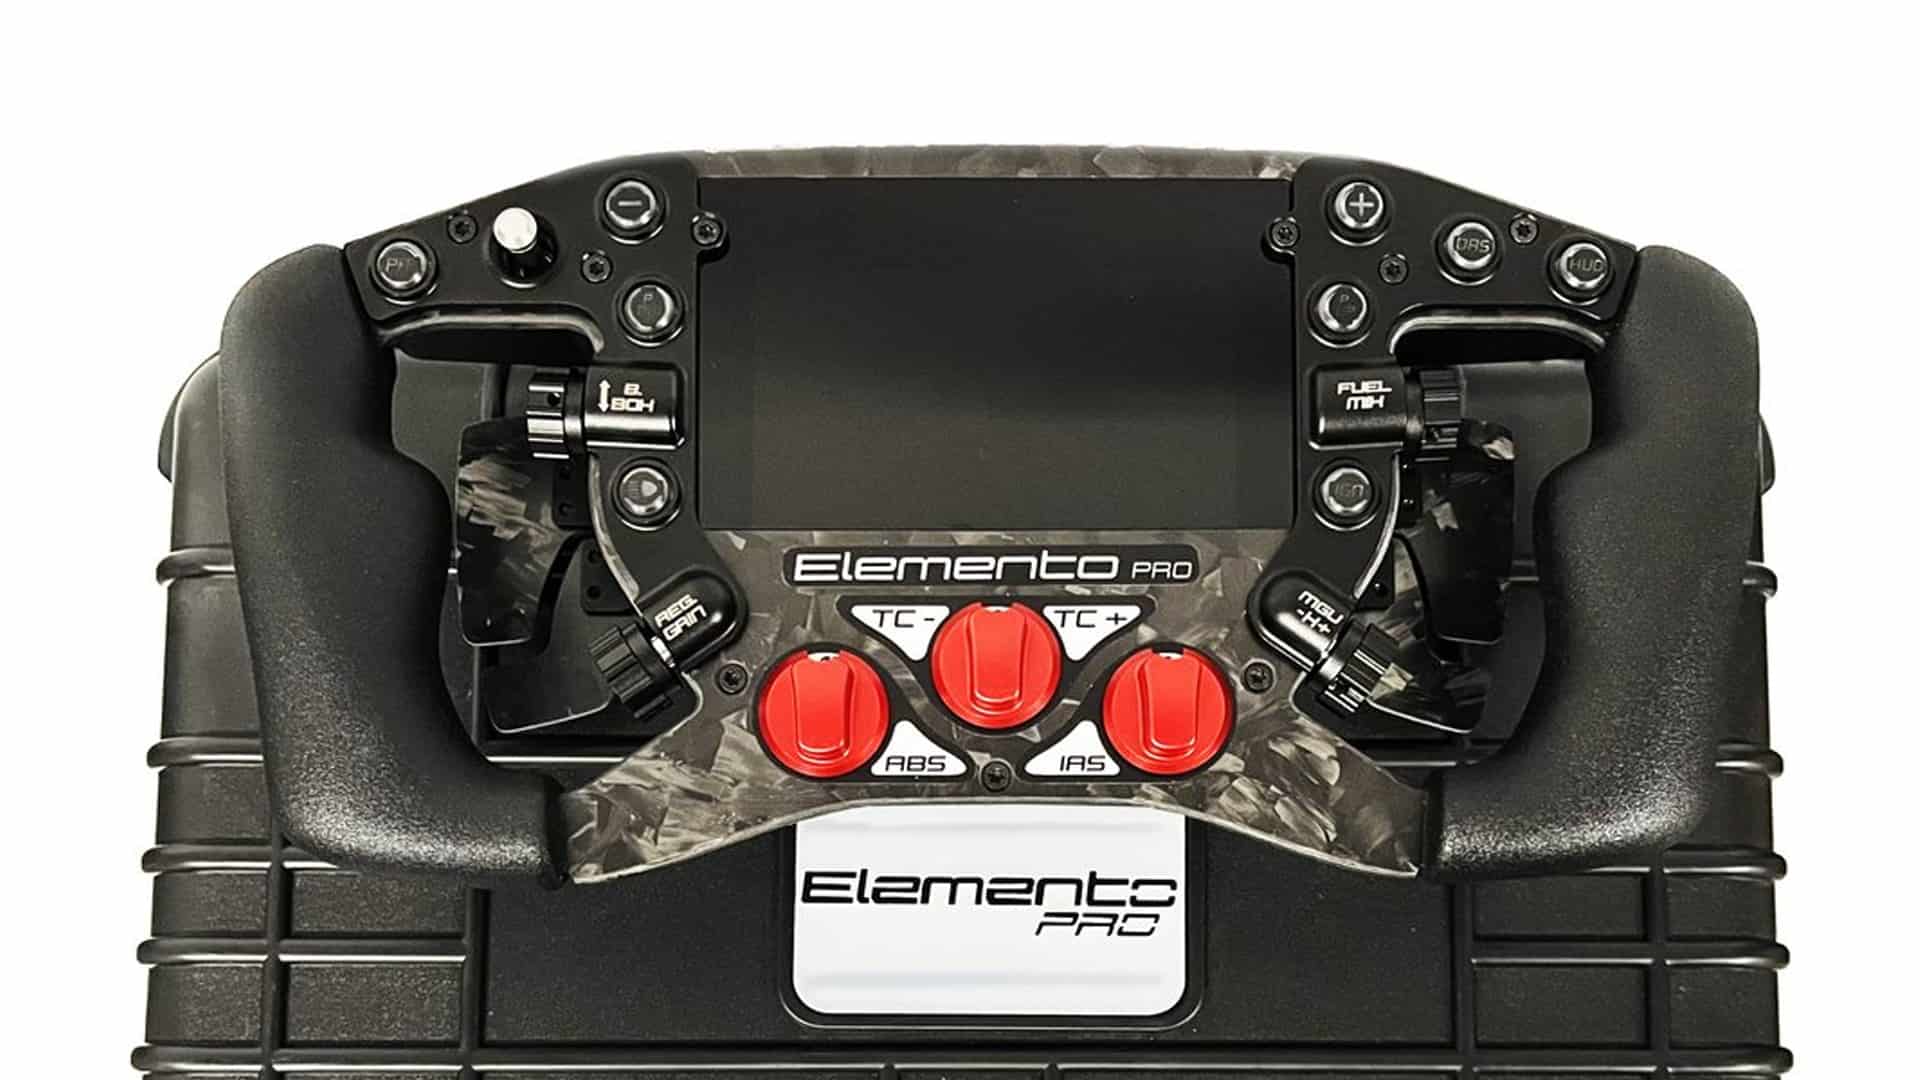 New Elemento Pro racing wheel available from VPG Simlab